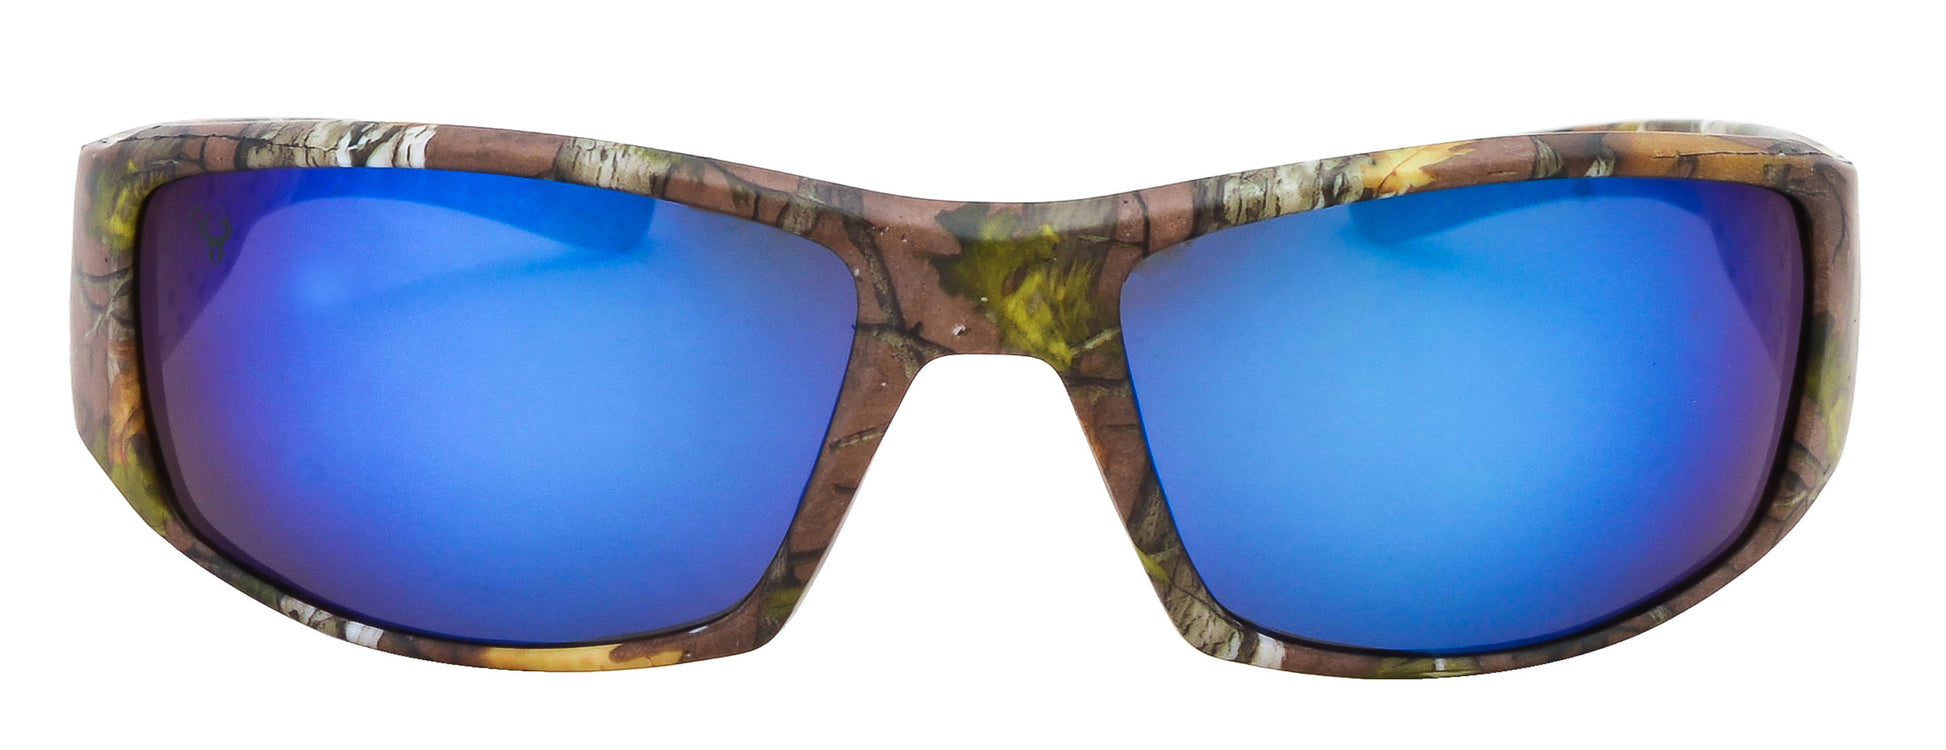 Third image: Hornz Brown Forrest Camouflage Polarized Sunglasses for Men Full Frame Wide Arms & Free Matching Microfiber Pouch – Brown Camo Frame – Blue Lens